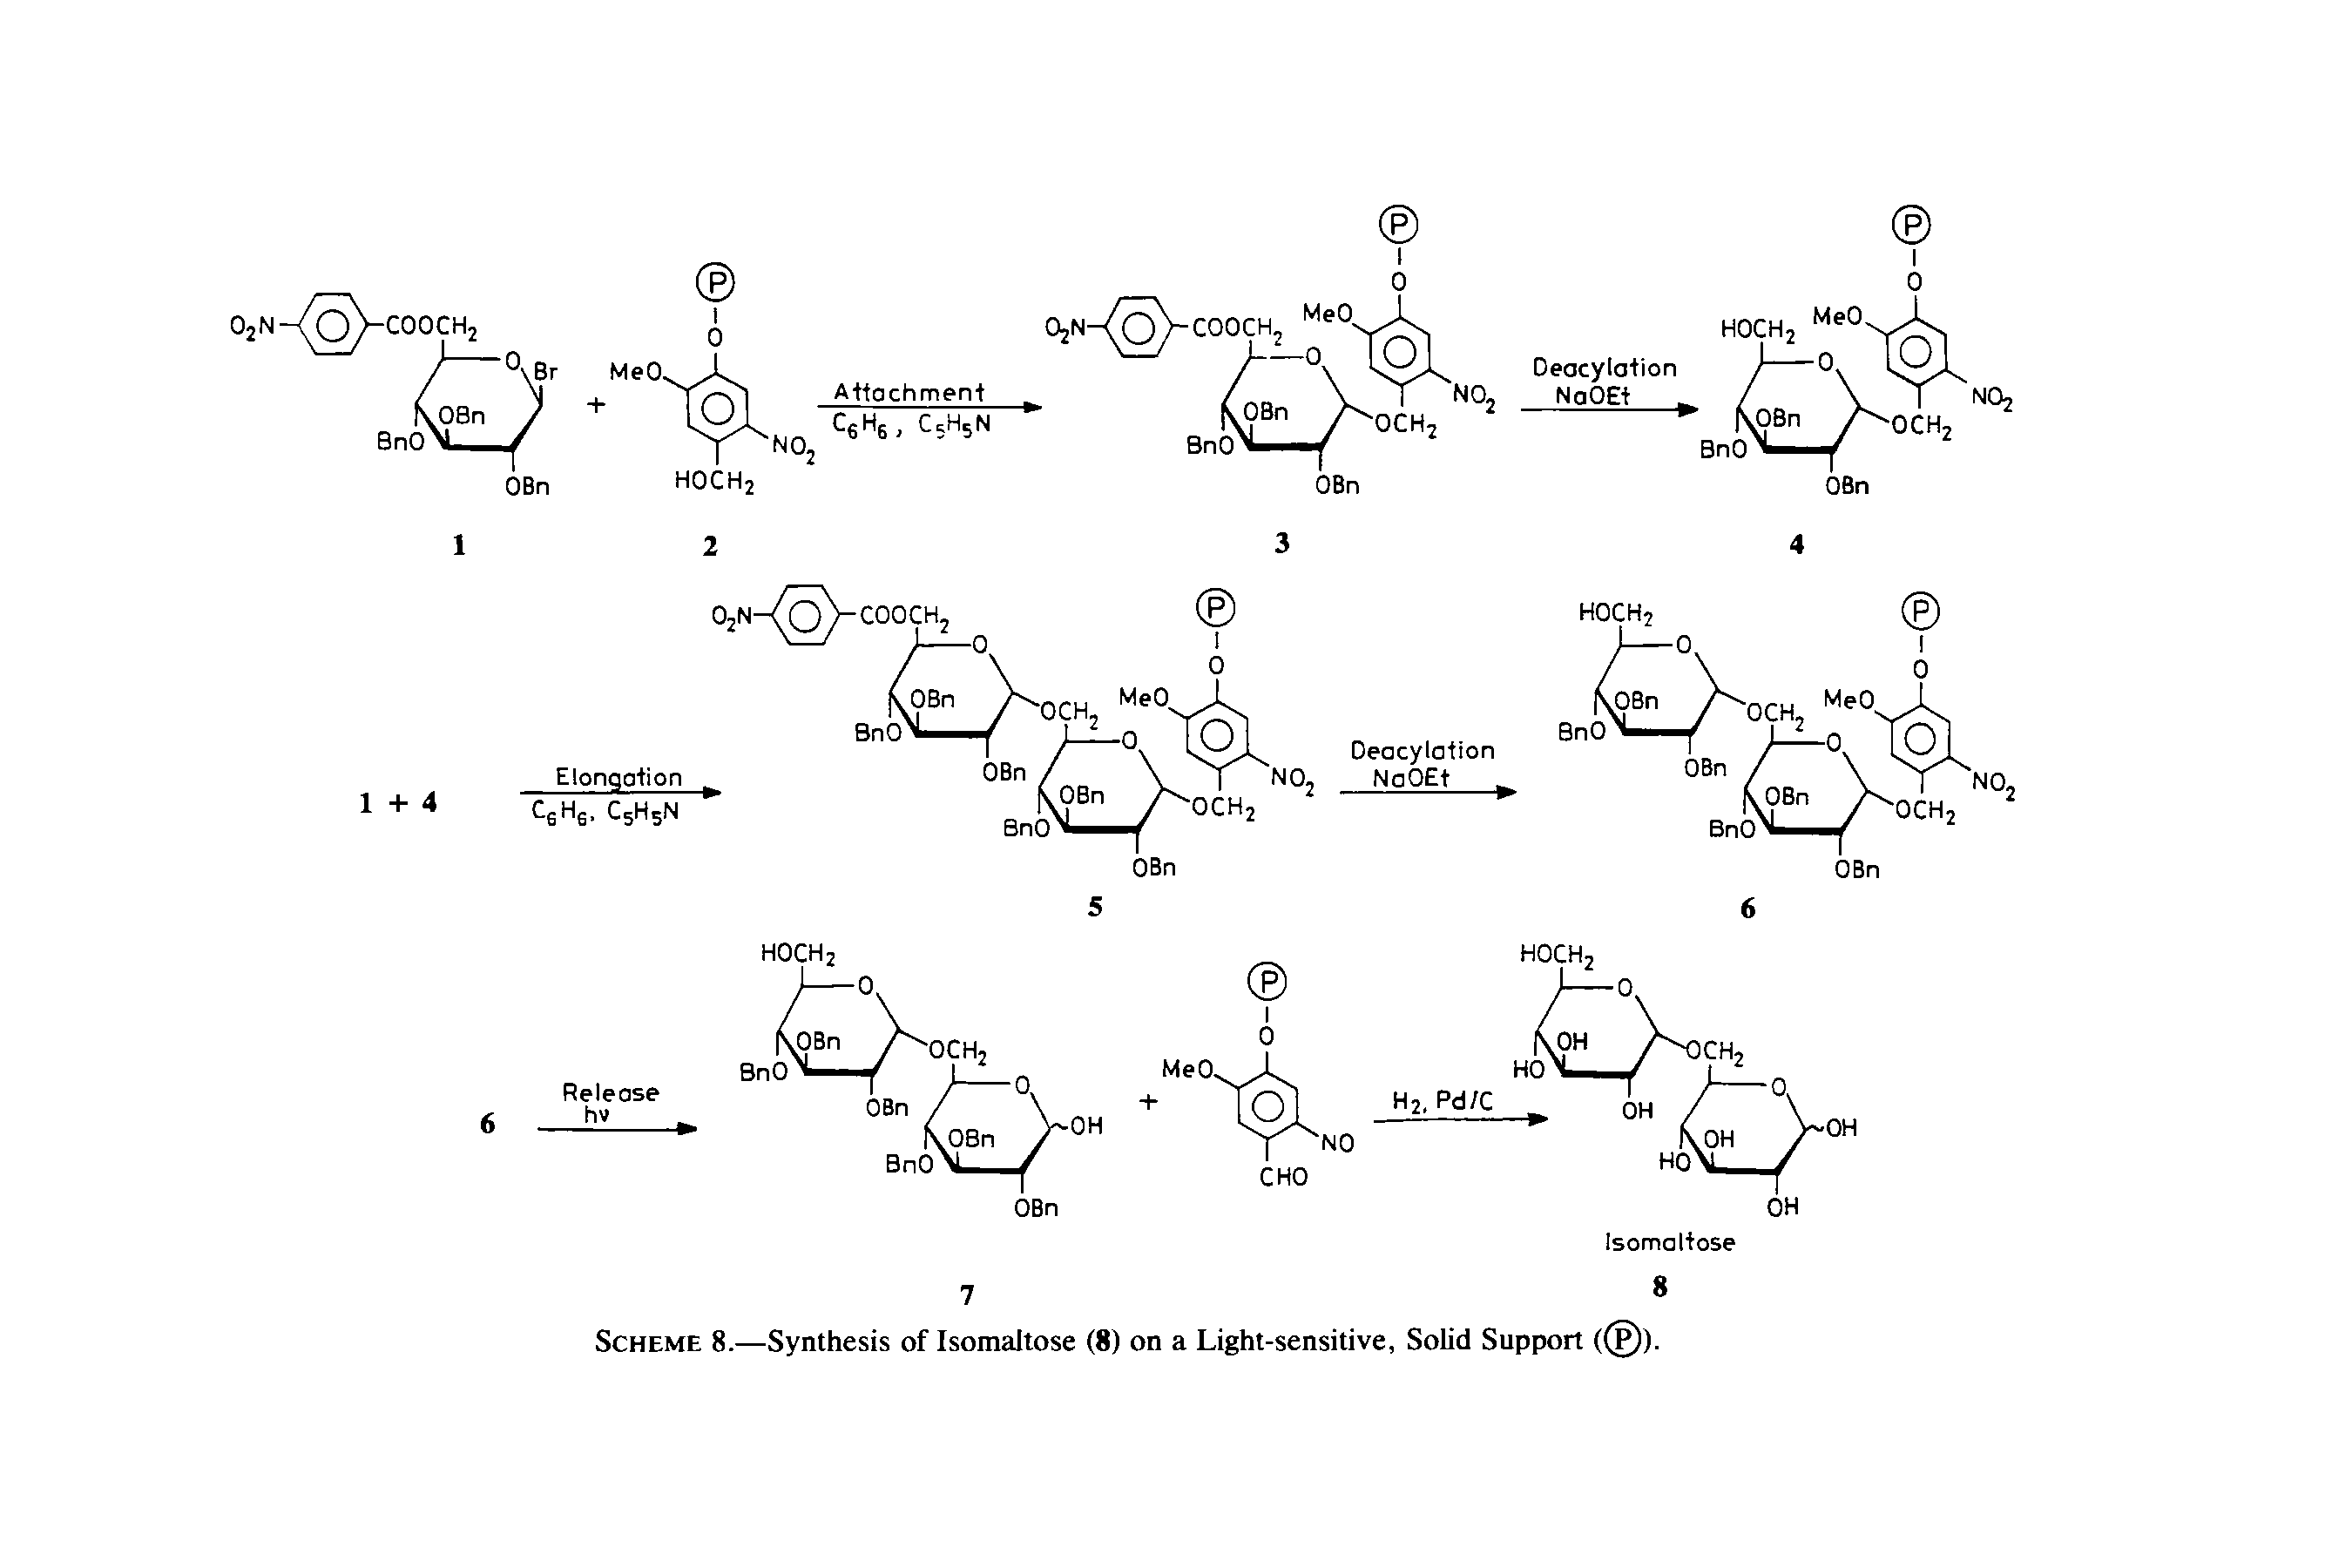 Scheme 8.—Synthesis of Isomaltose (8) on a Light-sensitive, Solid Support ((P)).